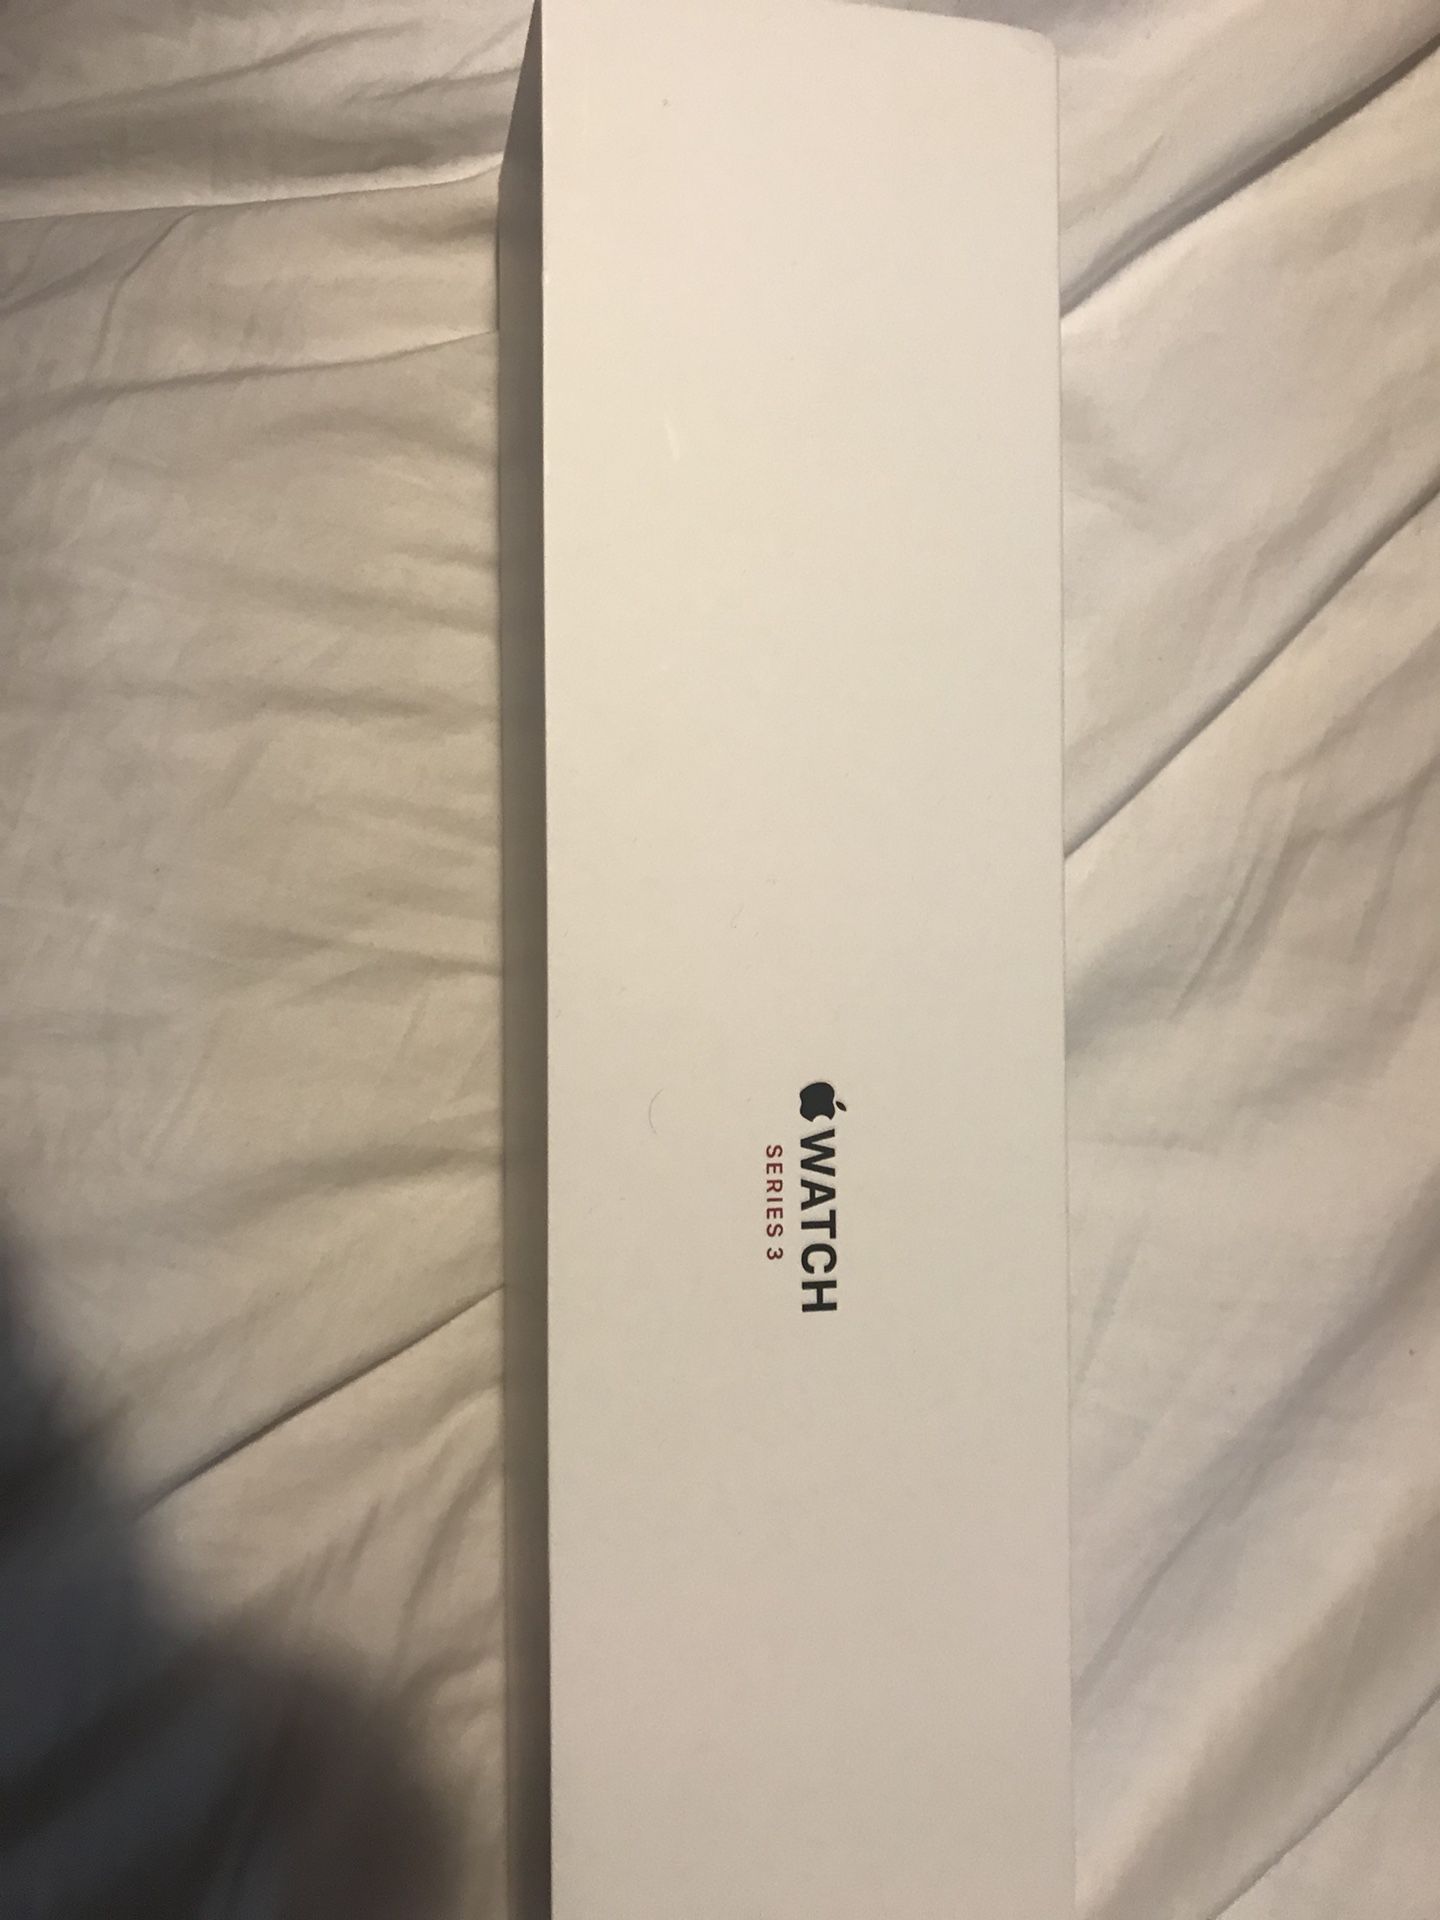 Apple Watch series 3 WiFi gps cellular with Apple care